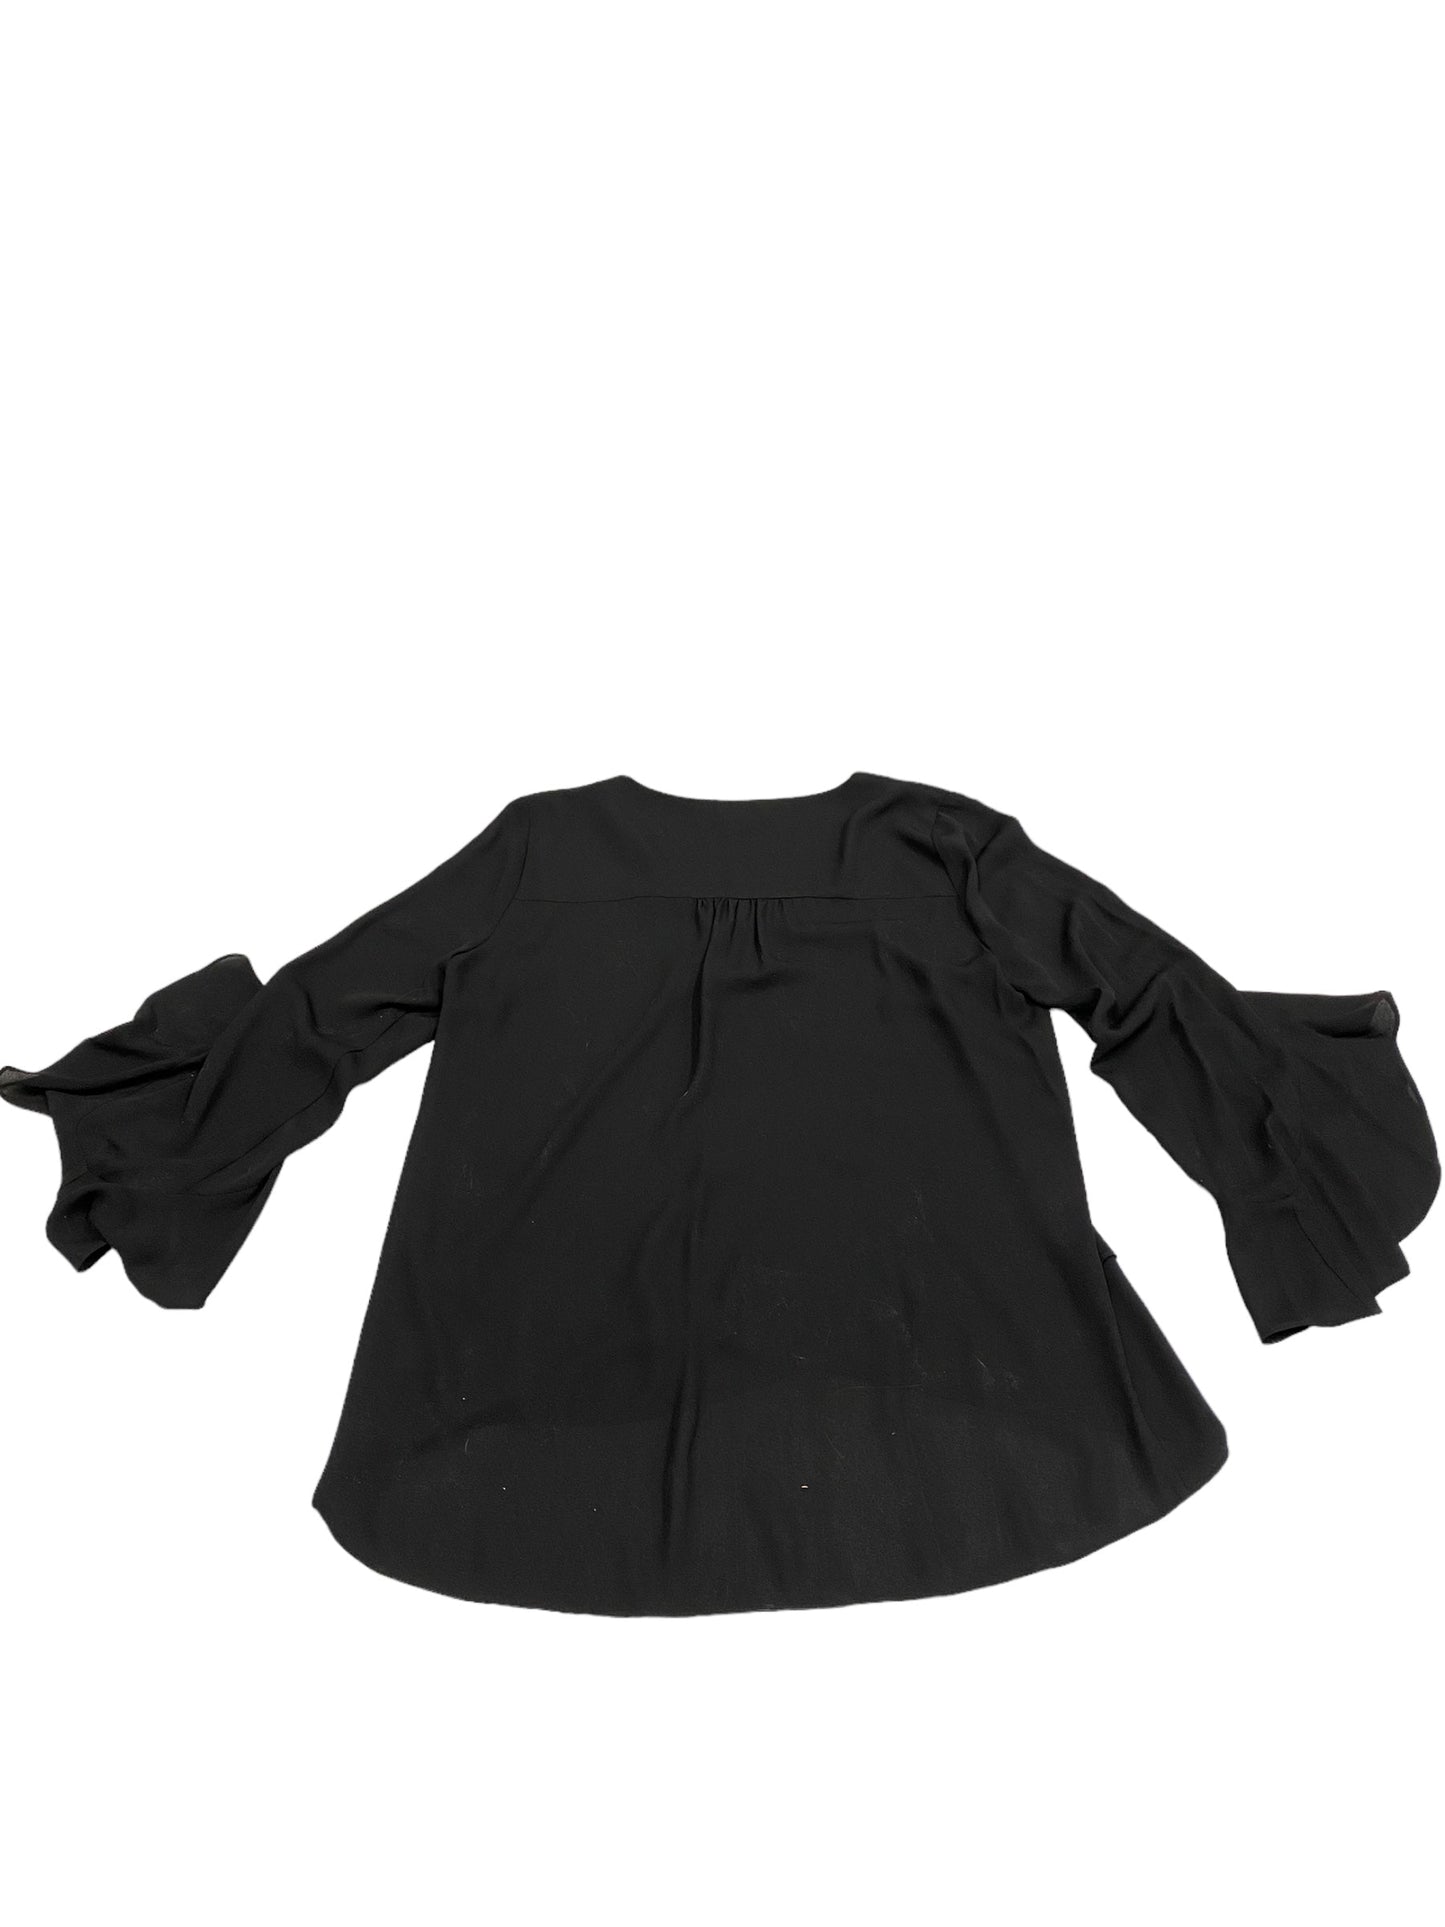 Blouse Long Sleeve By Vince Camuto  Size: S